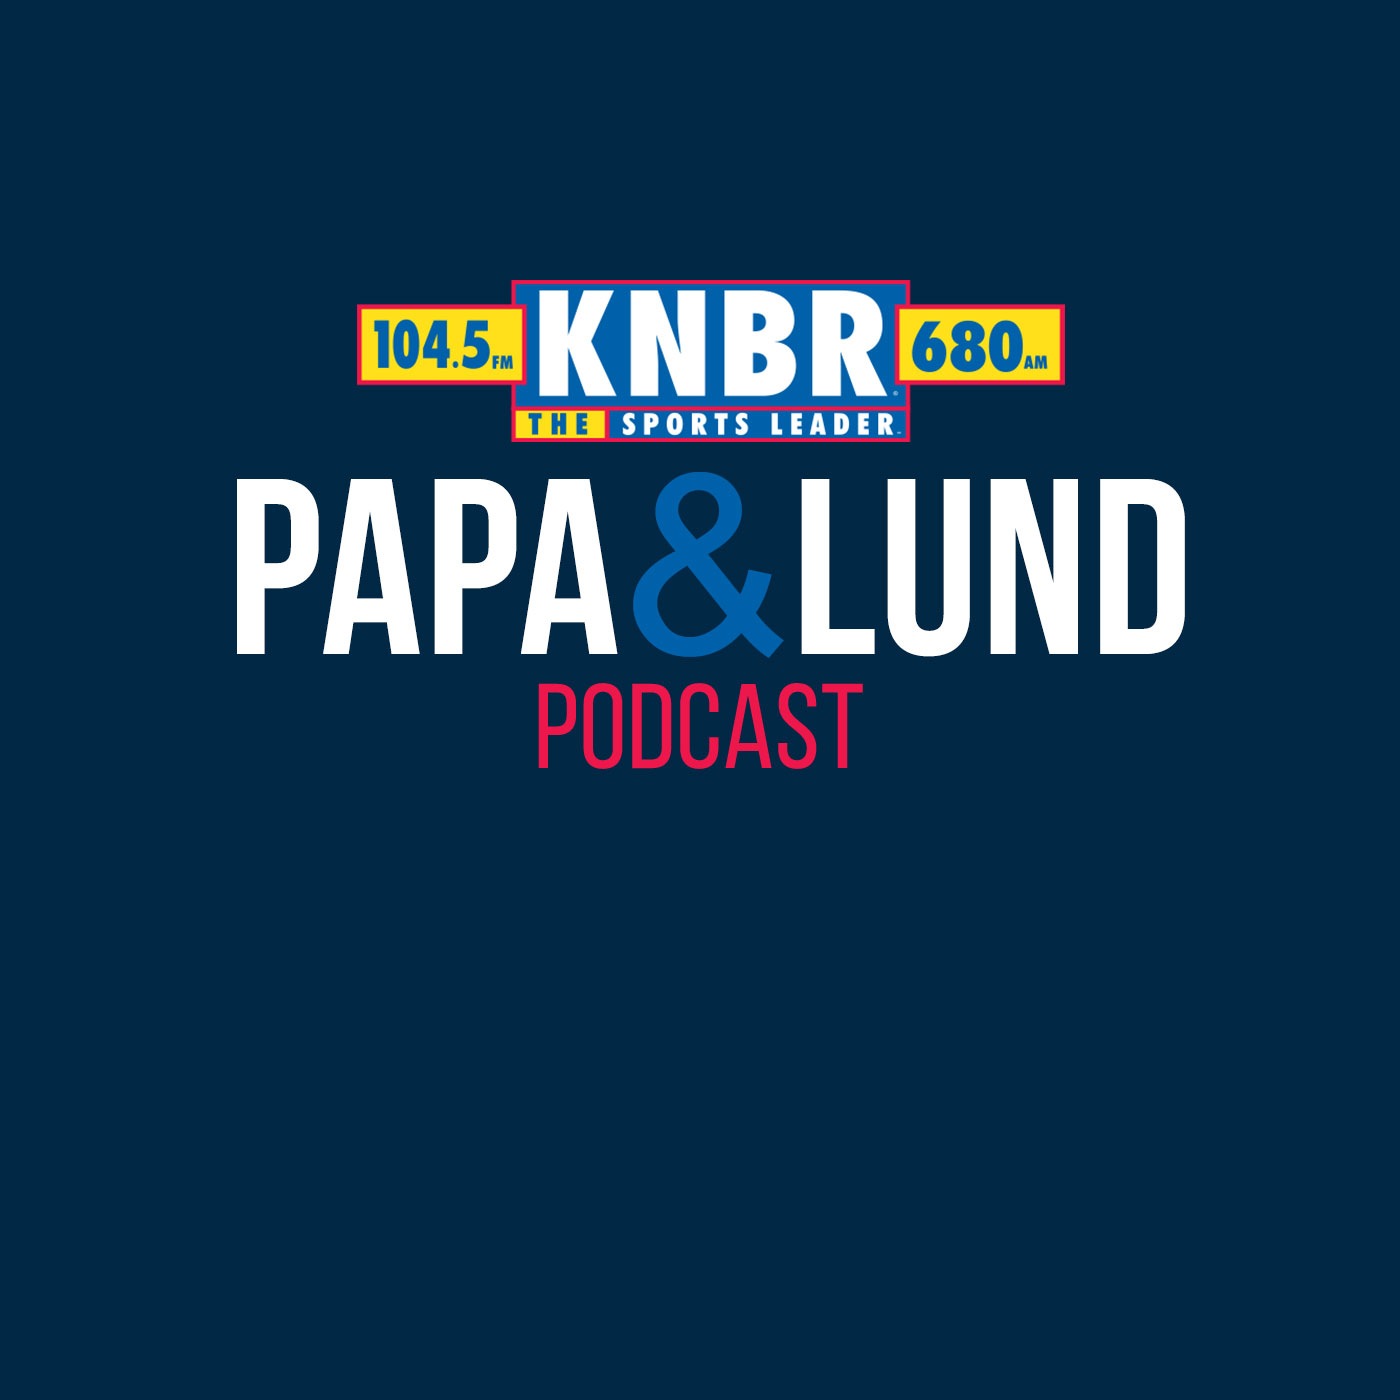 4-16 Papa & Lund Show - Hour 1 - Papa & Lund break down the Play-In matchup between the Warriors & Kings + Interview with Bobby Marks to discuss the Warriors future